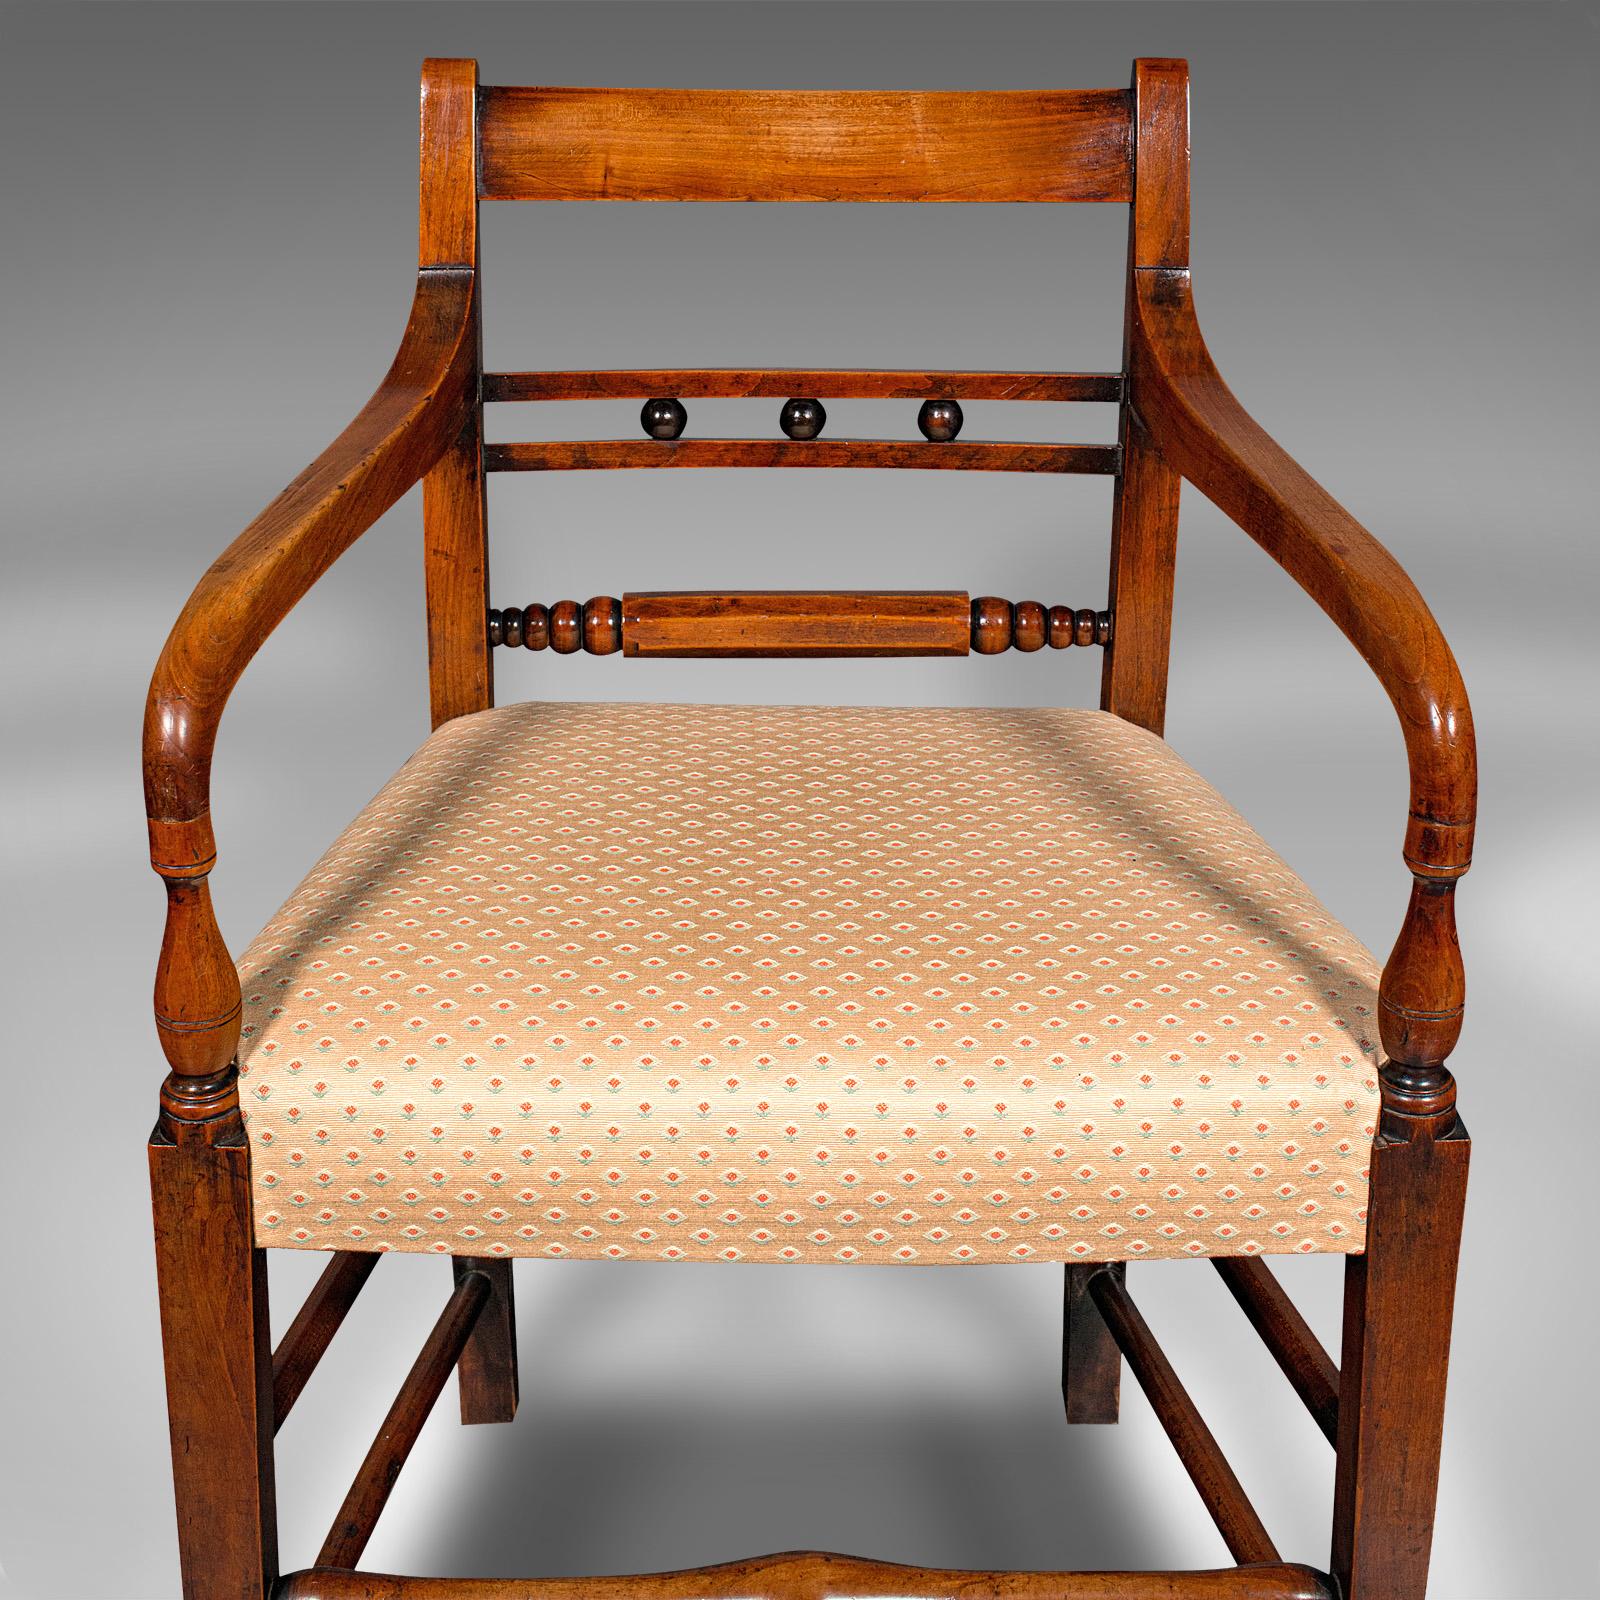 Antique Elbow Chair, English, Fruitwood, Office, Desk Seat, Victorian, C.1870 For Sale 2